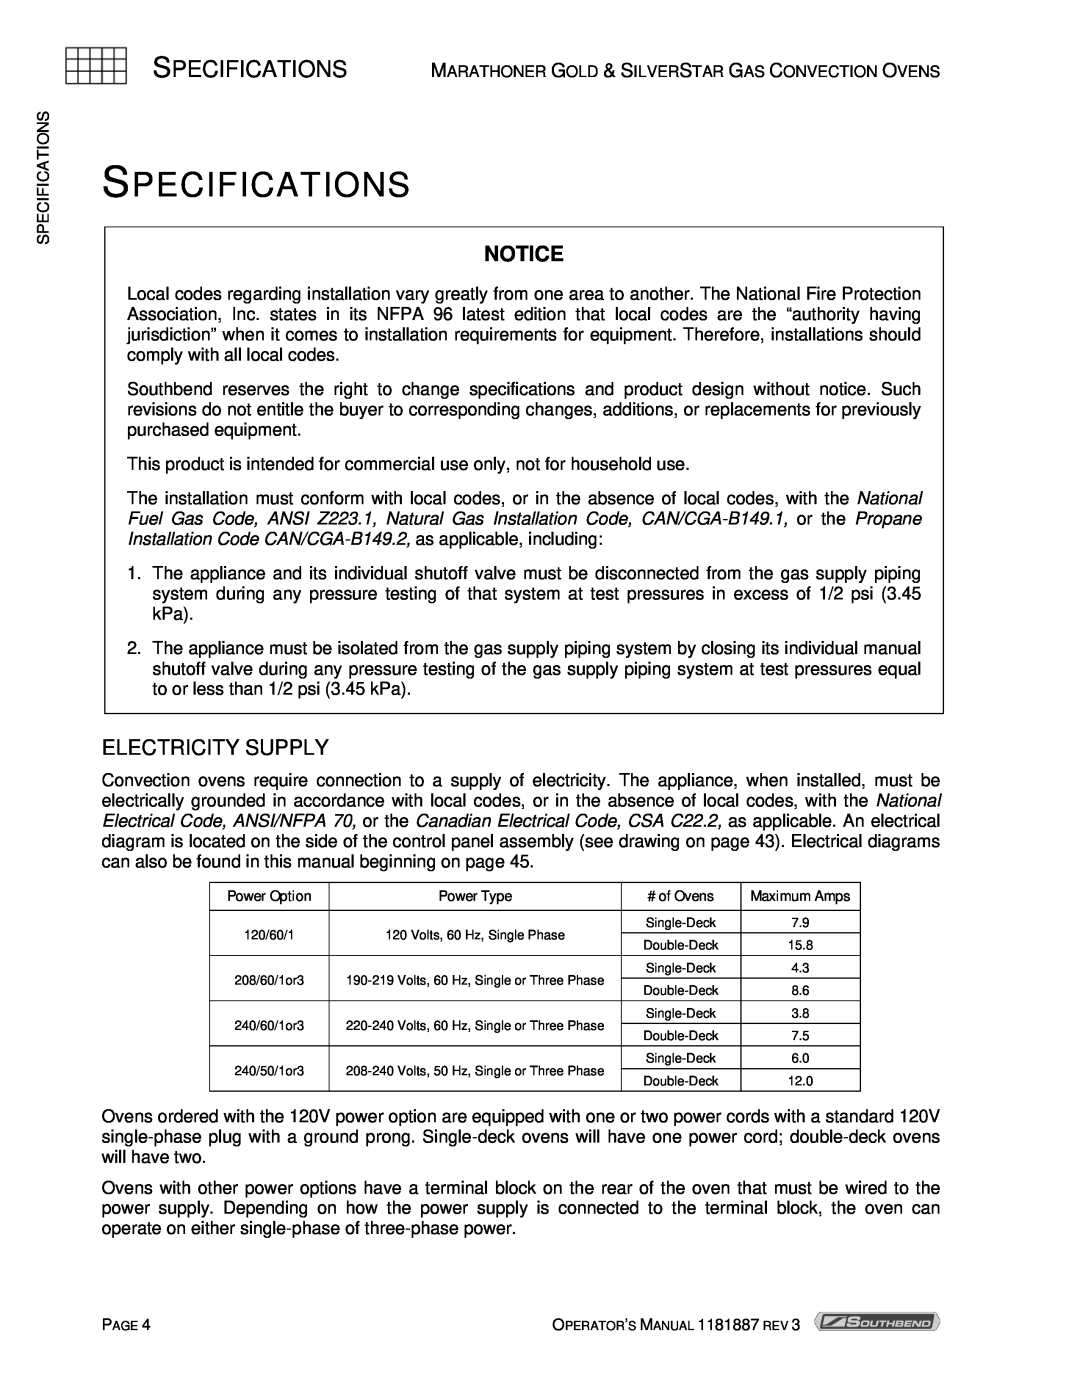 Southbend Marathoner manual Specifications, Electricity Supply 